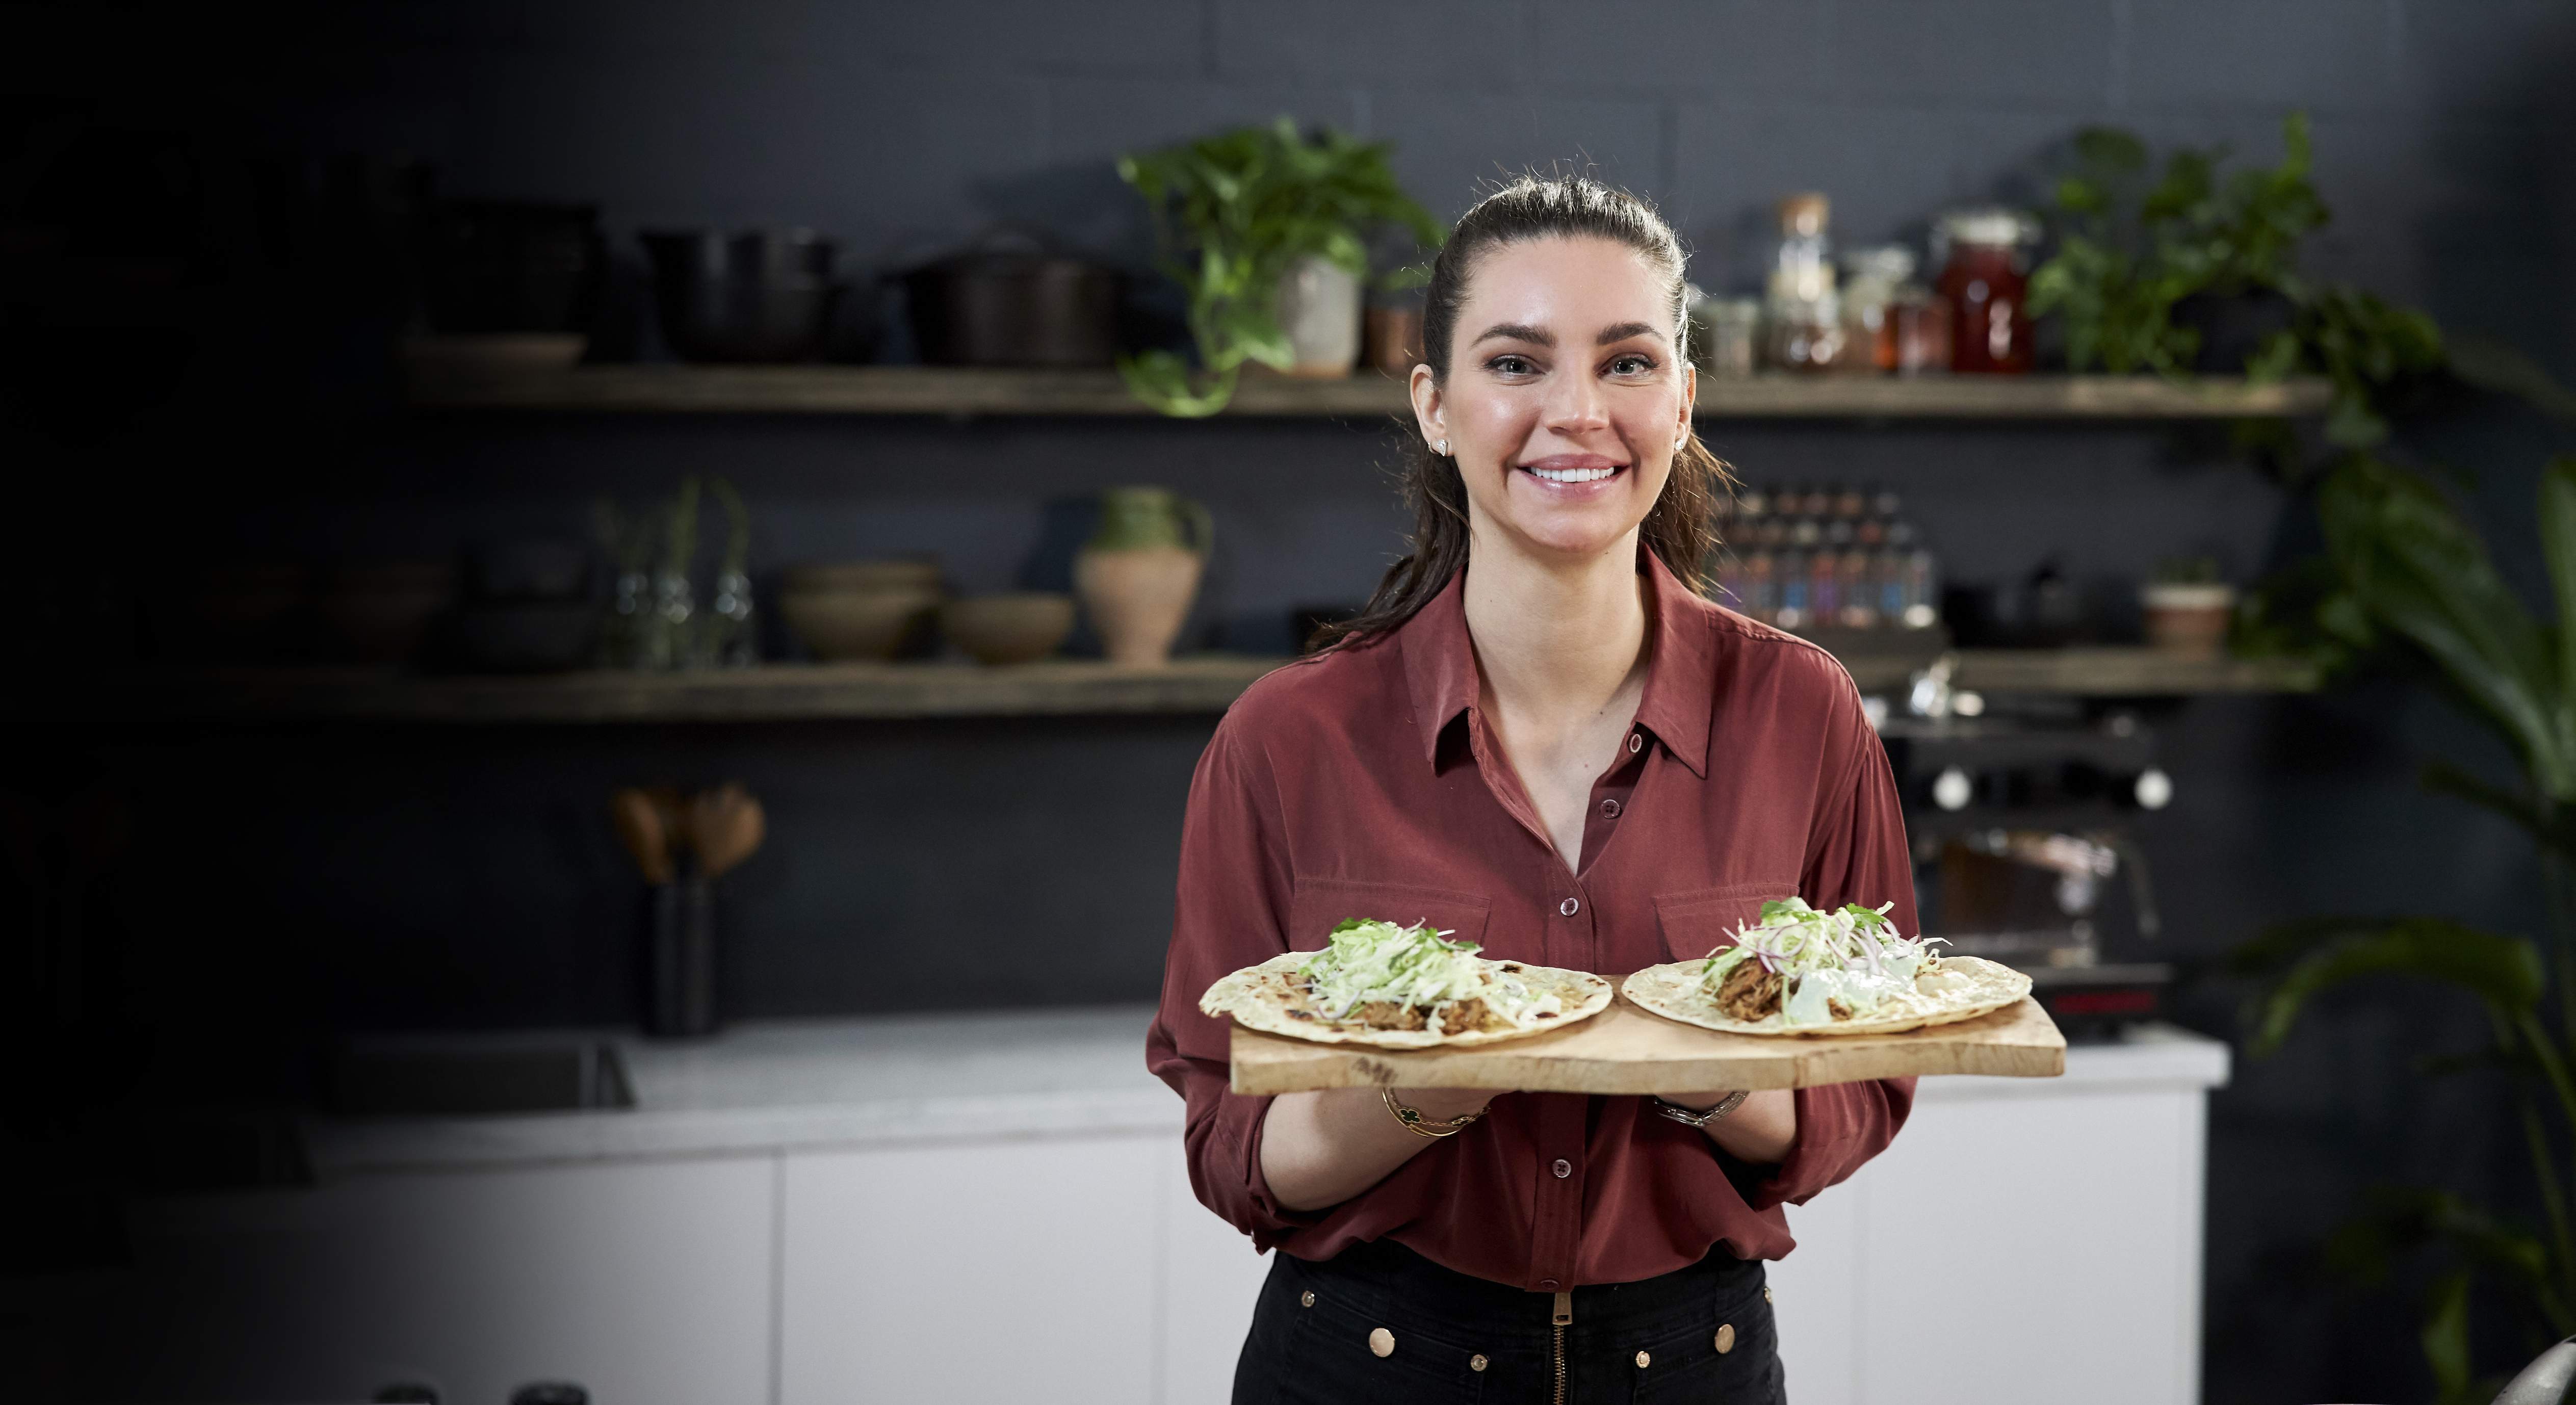 Masterchef Australia star Sarah Todd’s latest cookbook covers Indian traditional delicacies with an Australian twist